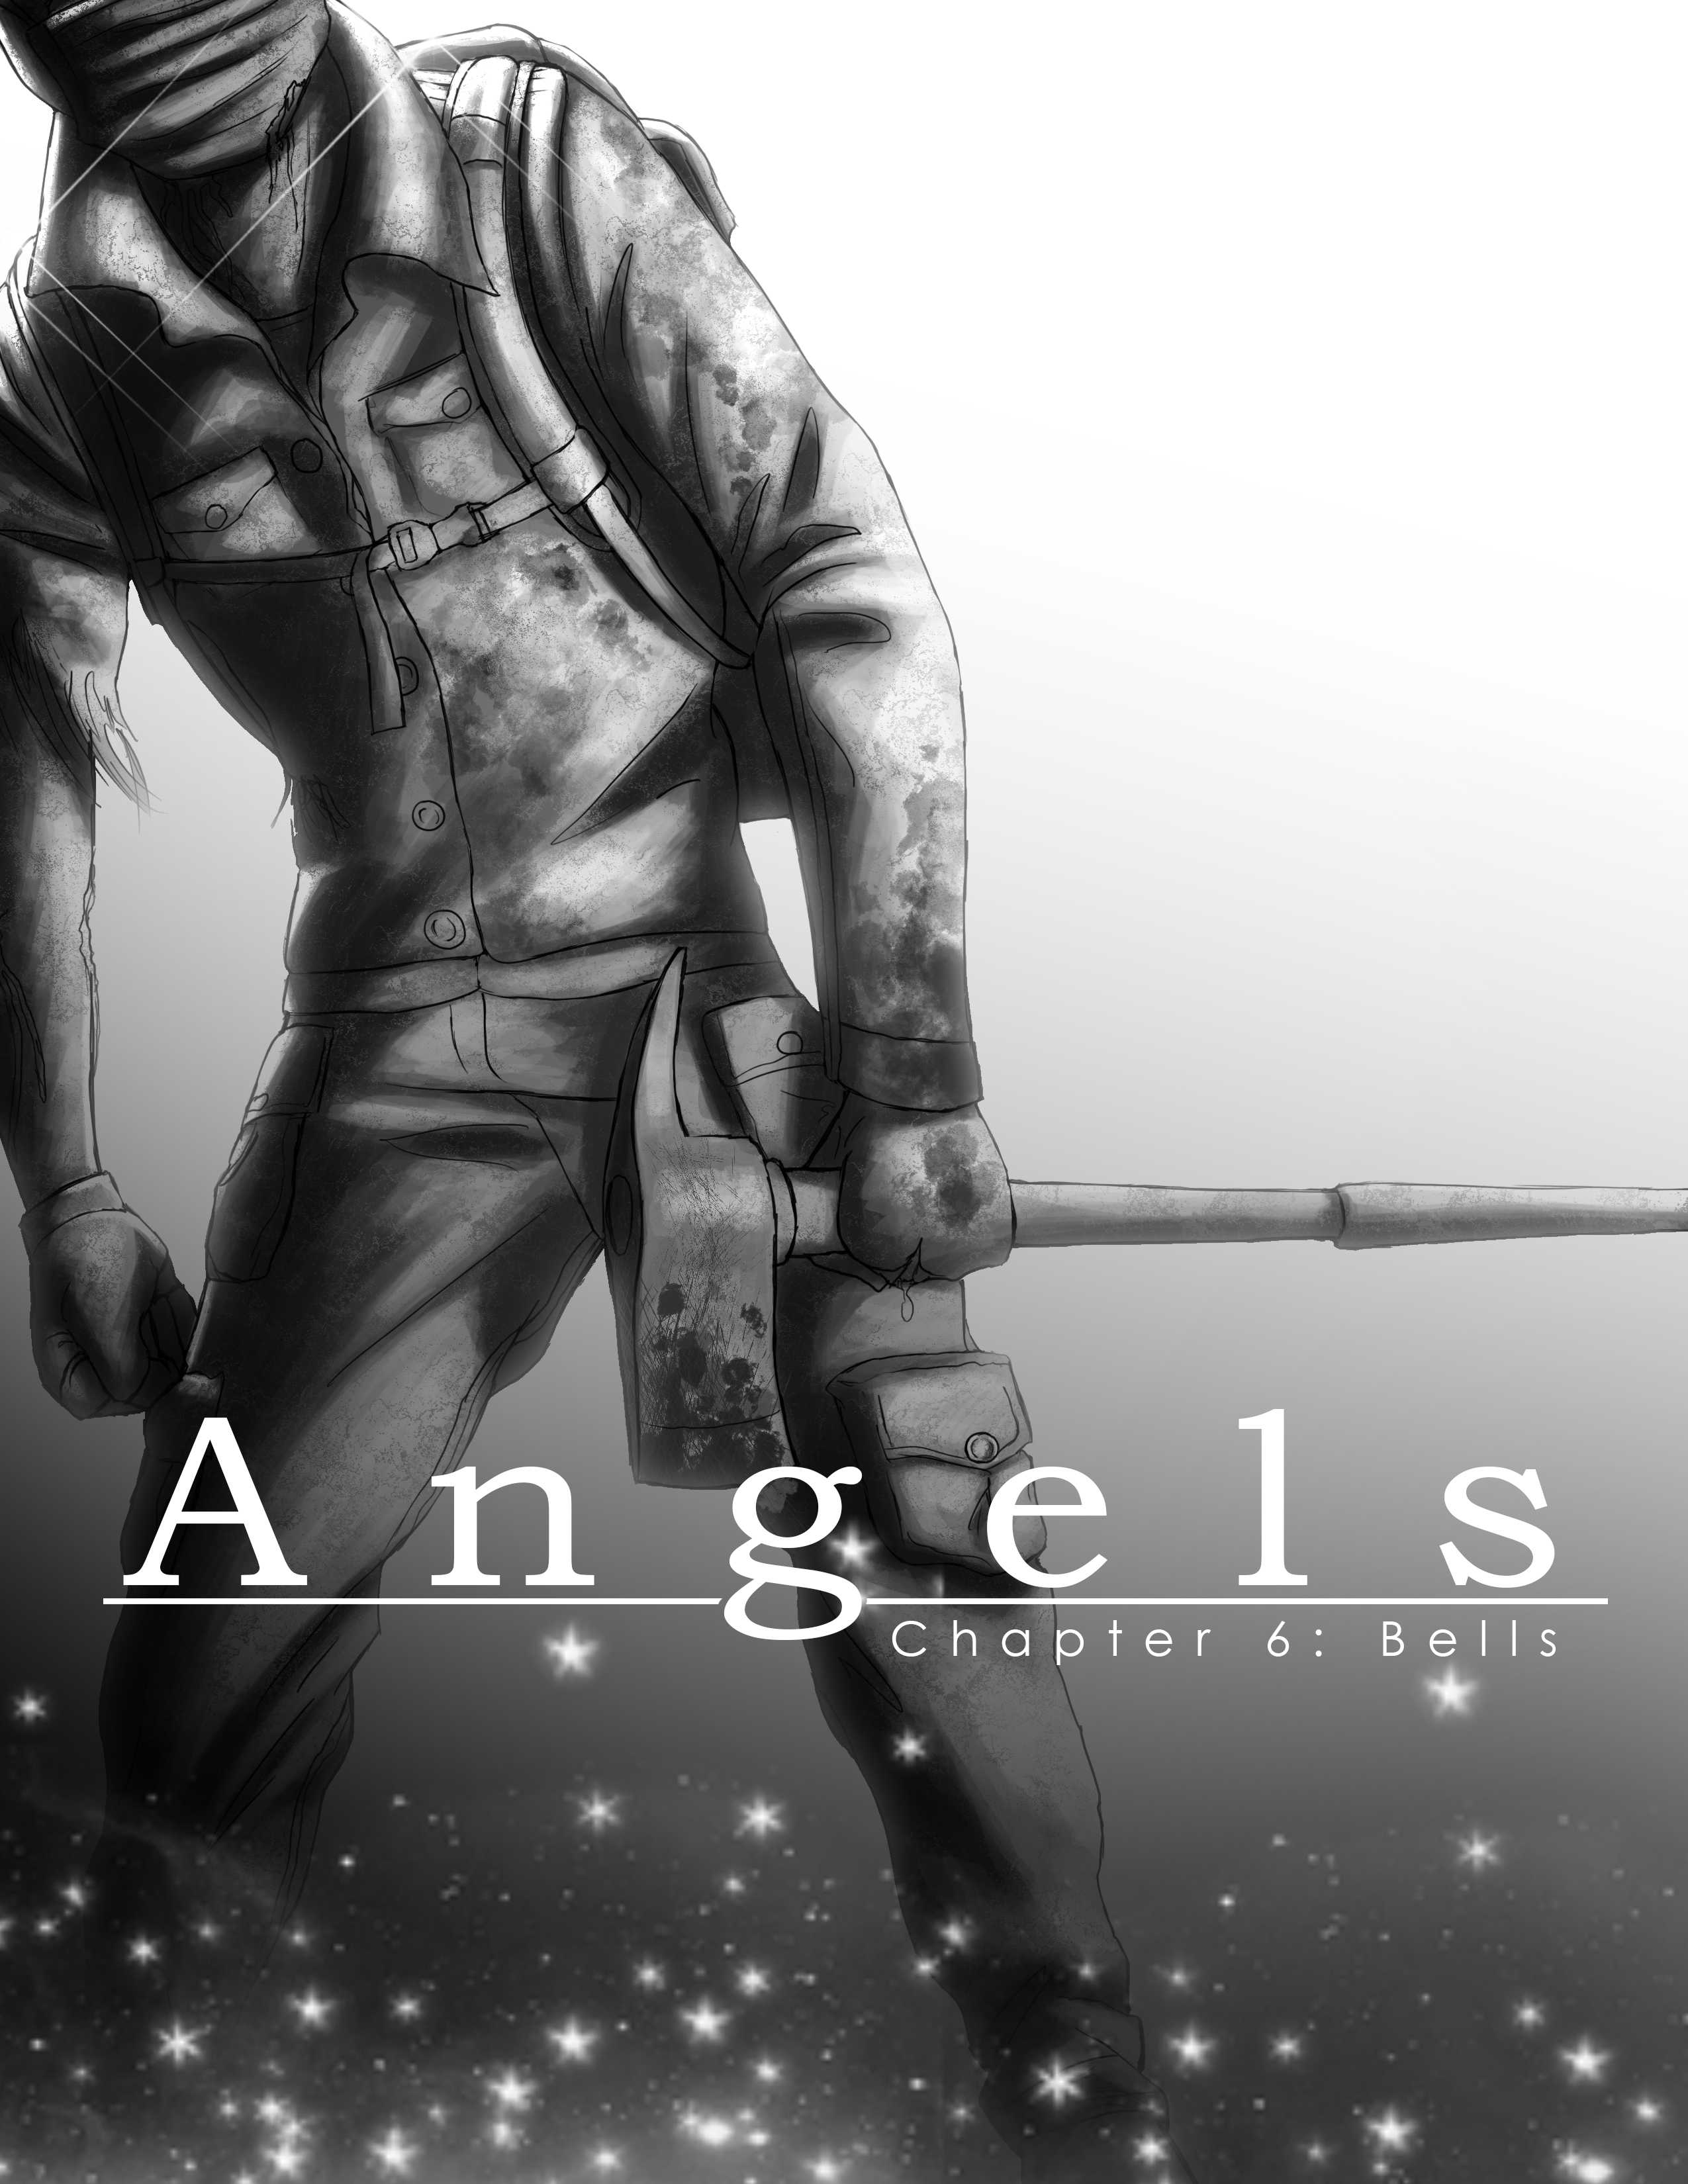 Cover art of the Angels concept comic